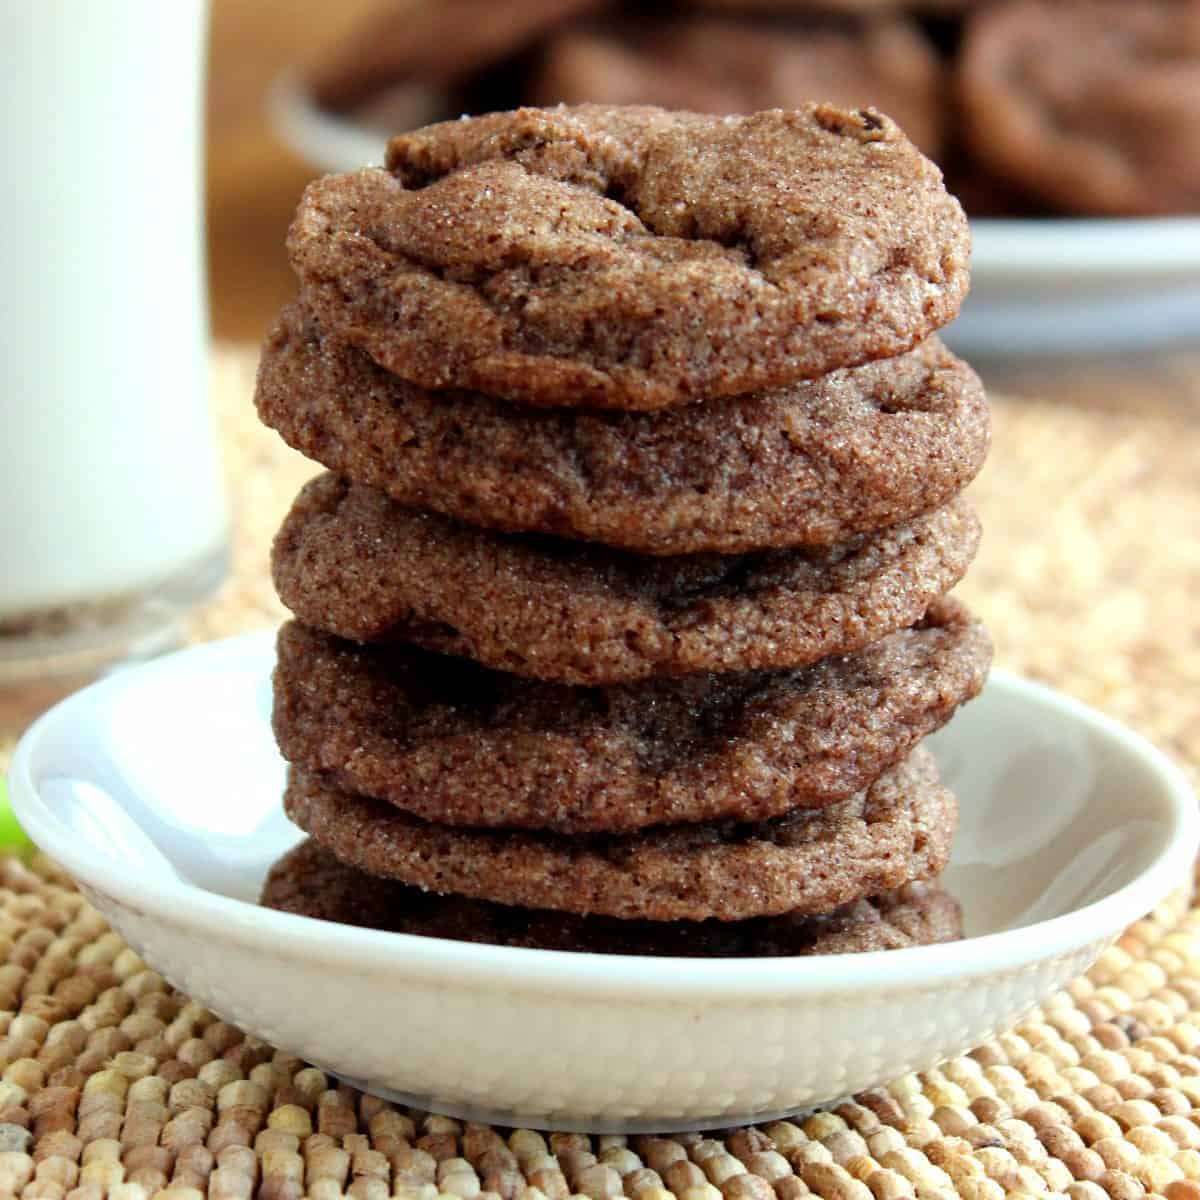 Square photo of a stack of vegan double chocolate chip cookies in a small white bowl.